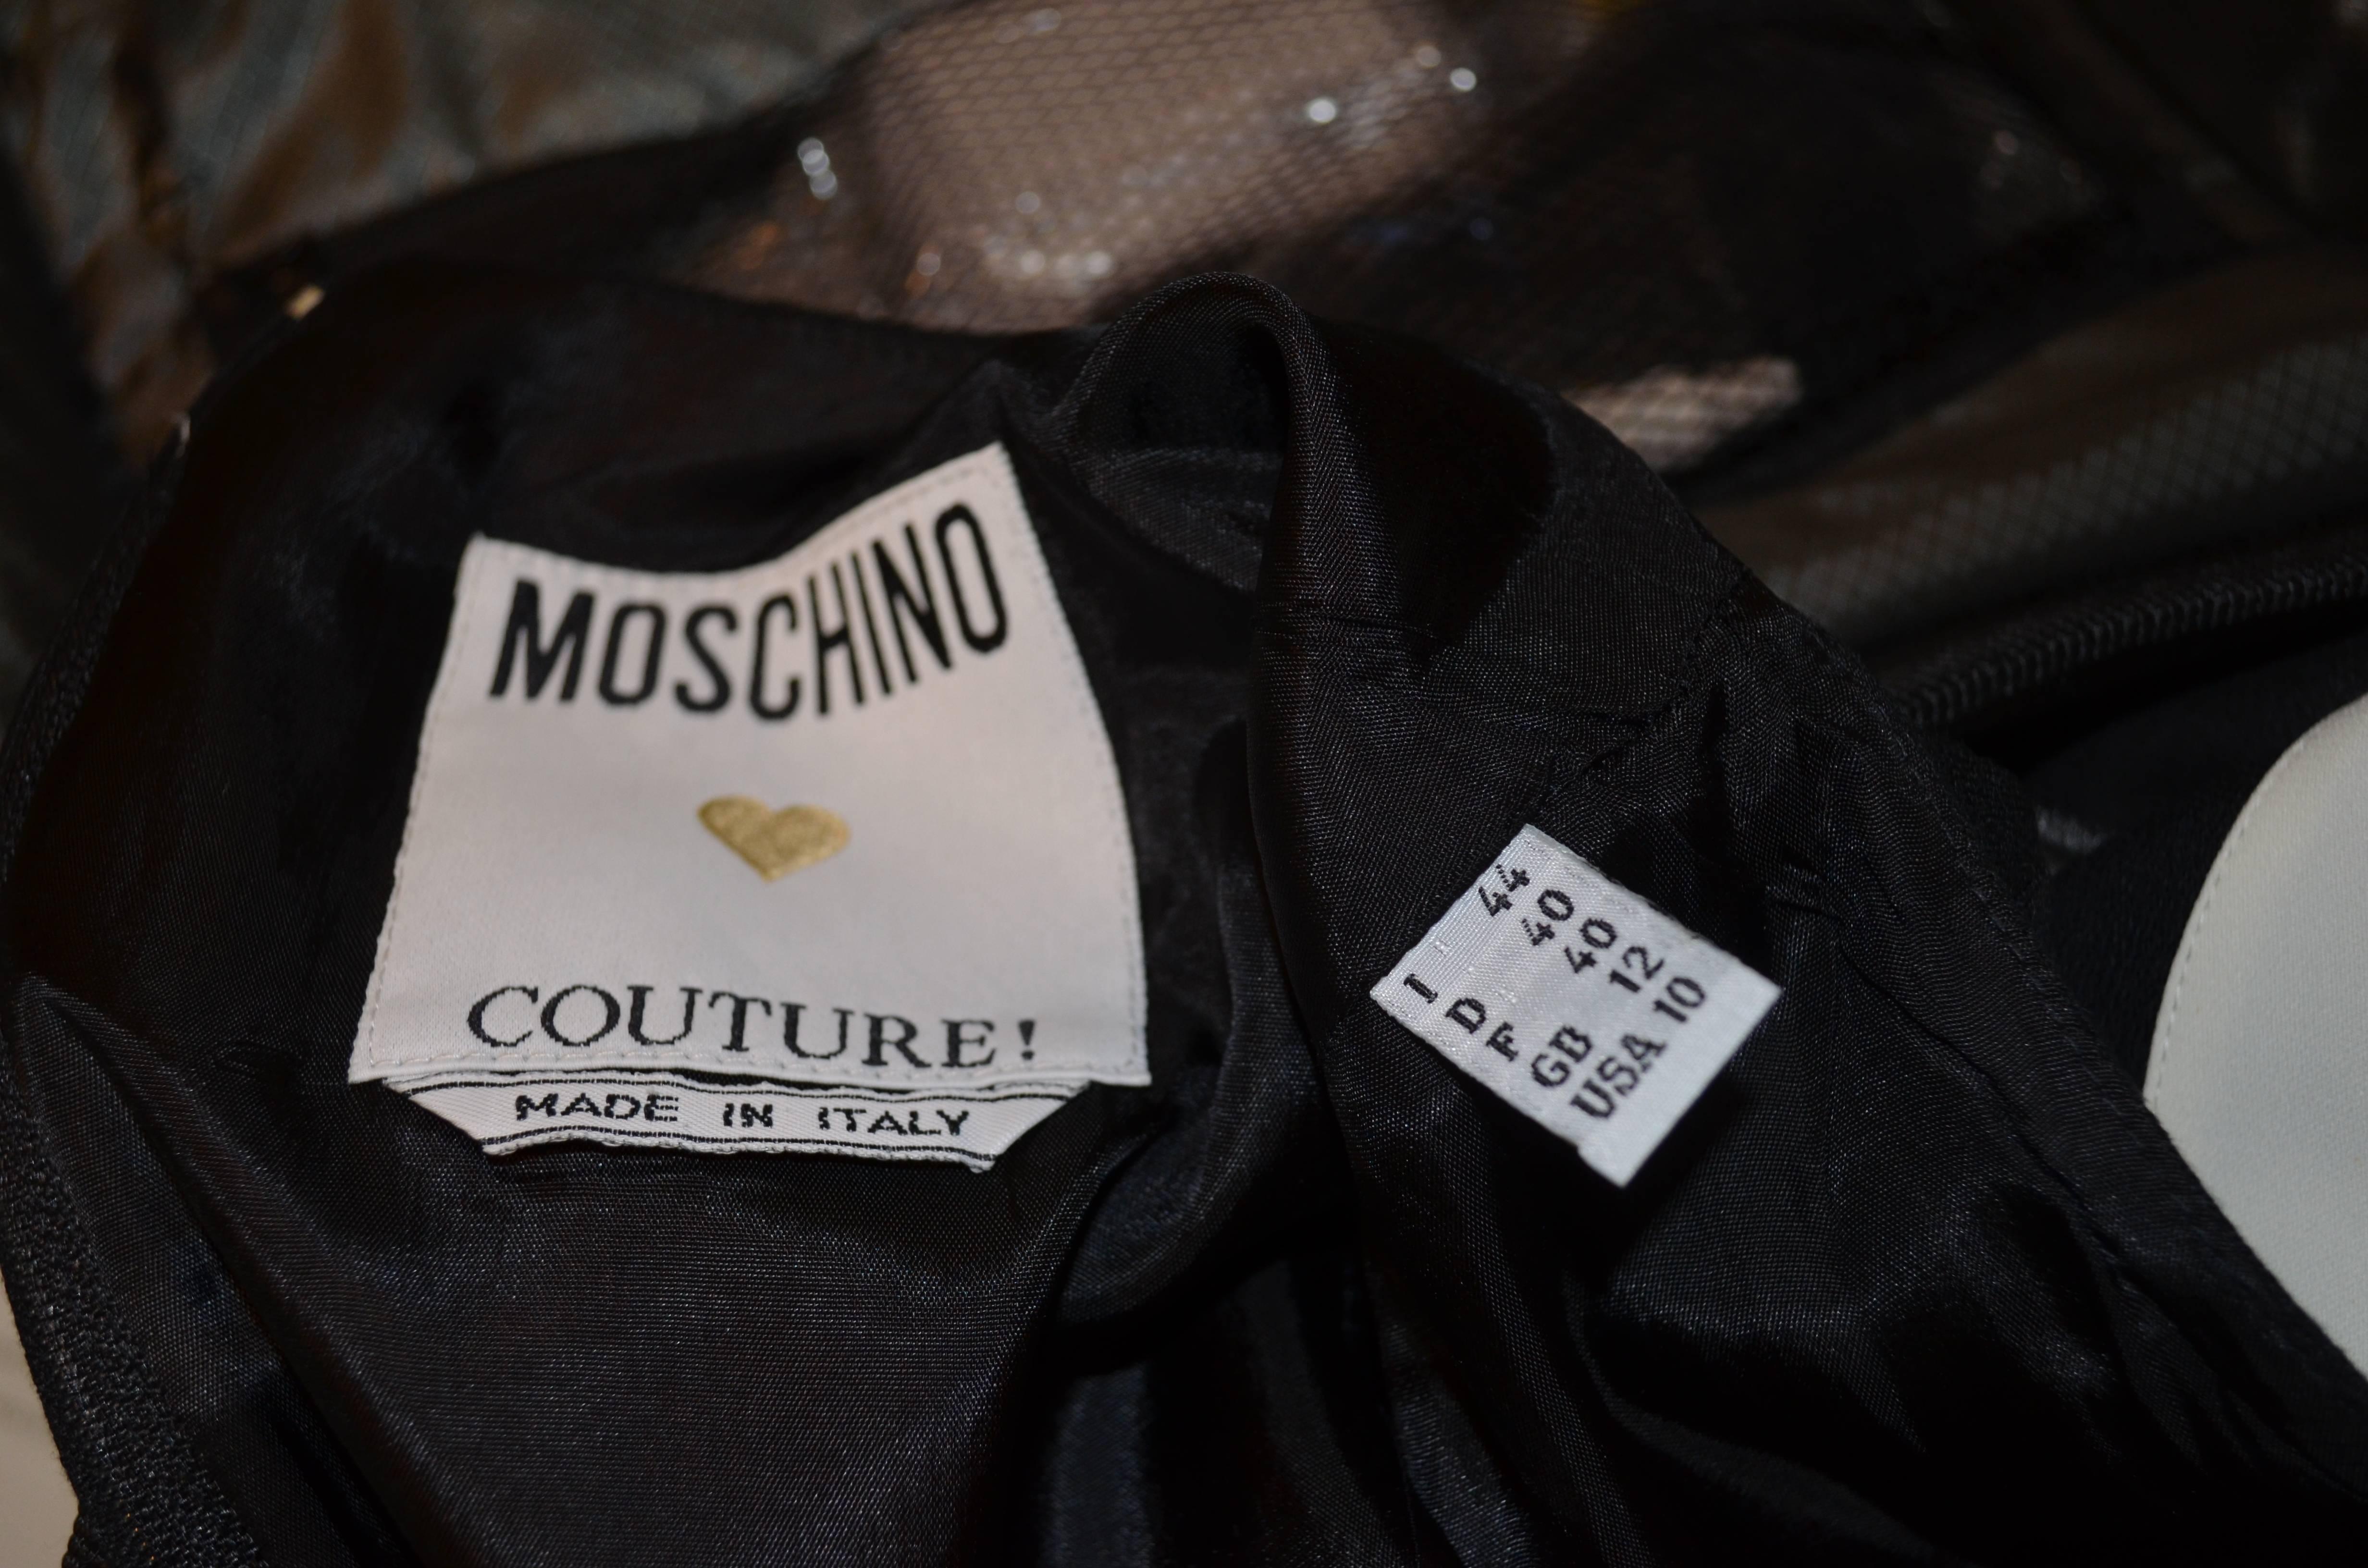 Moschino Couture Question Mark Dress 1988-89 In Excellent Condition For Sale In Carmel, CA